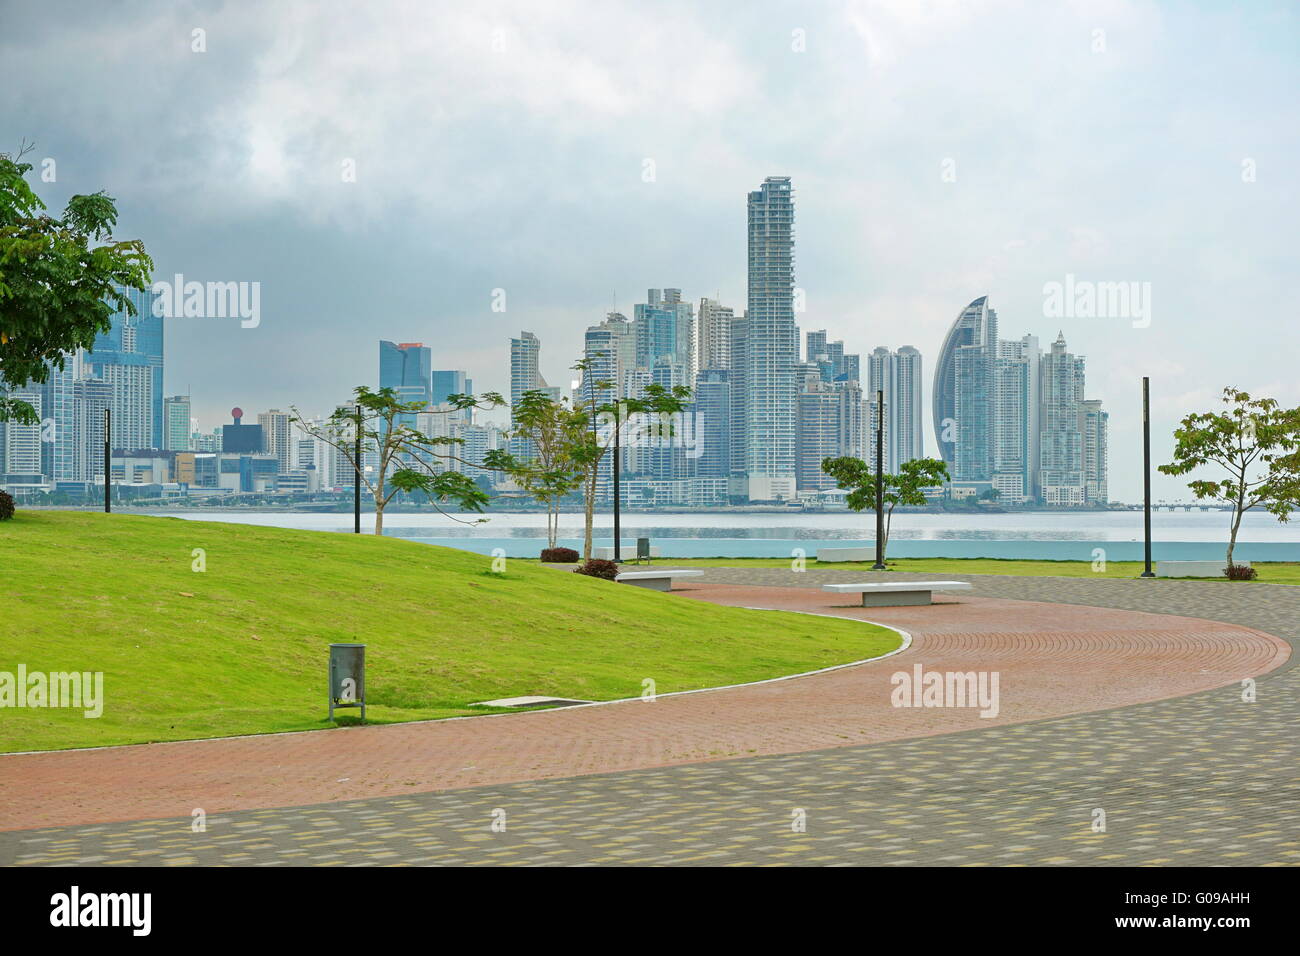 Oceanfront walkway in Panama City with skyscrapers and cloudy sky, Panama, Central America Stock Photo